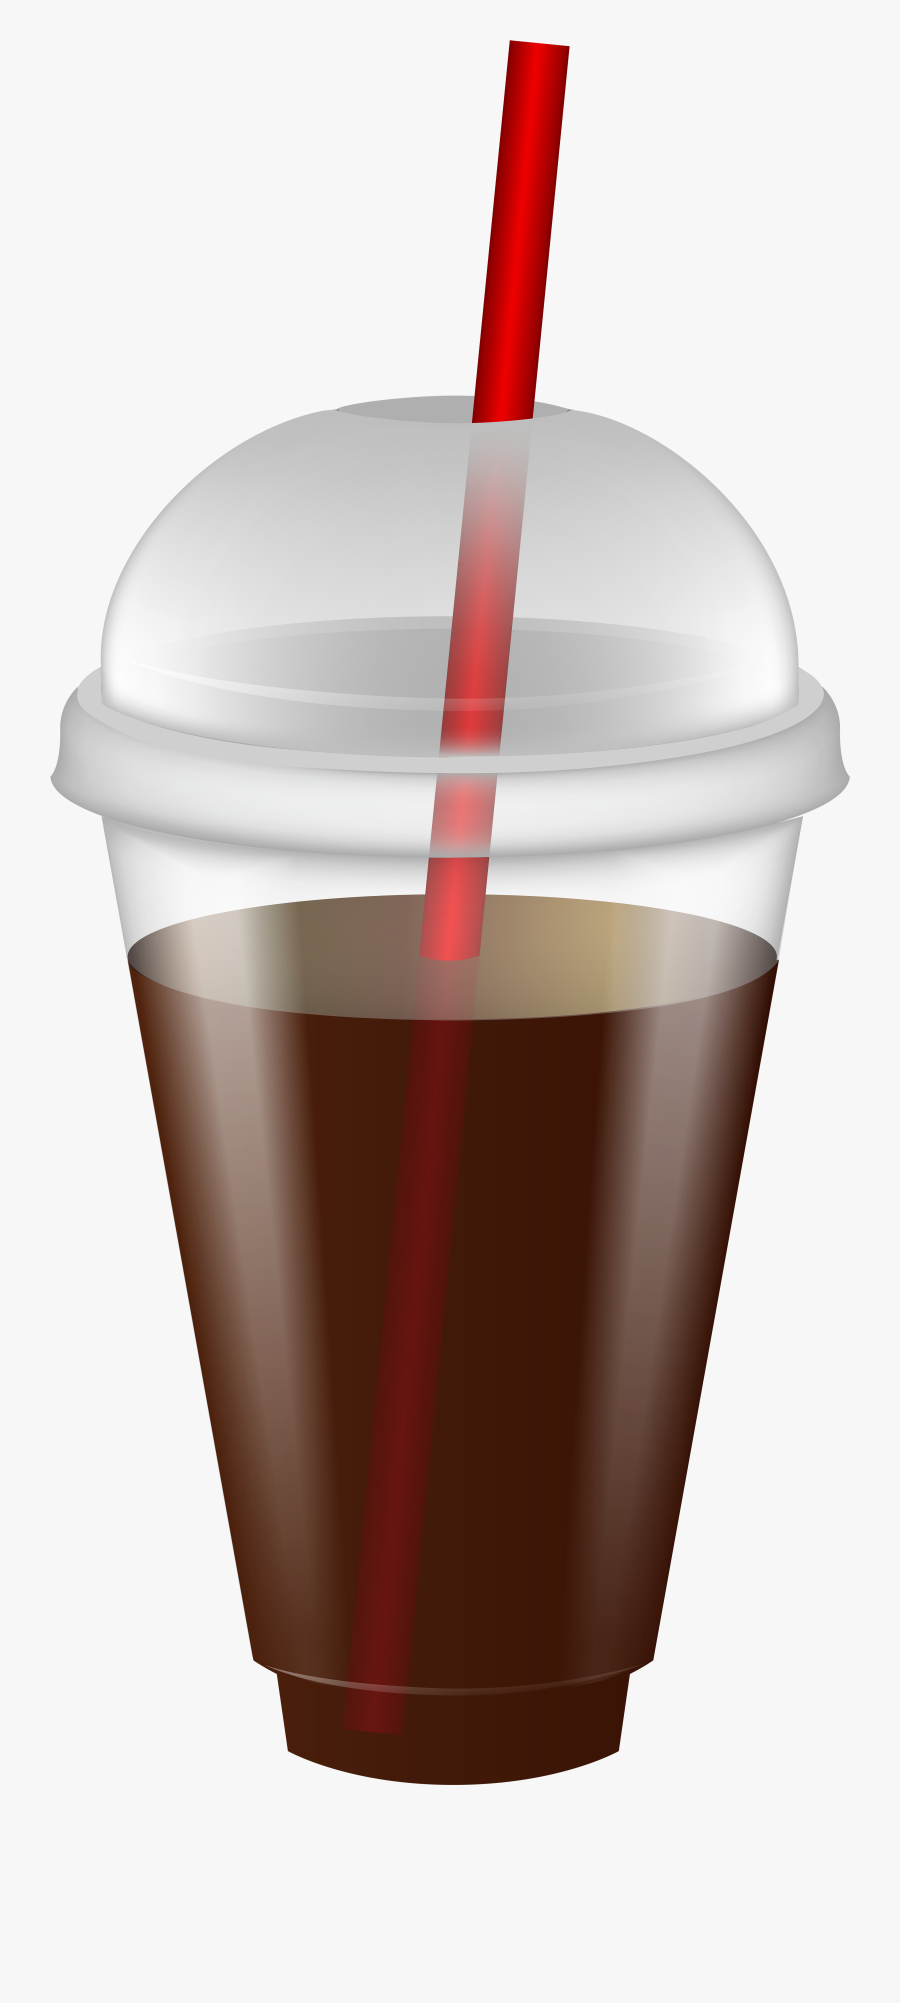 Png Royalty Free Drink In Plastic Cup With Clip Art - Plastic Cup Clip Art, Transparent Clipart